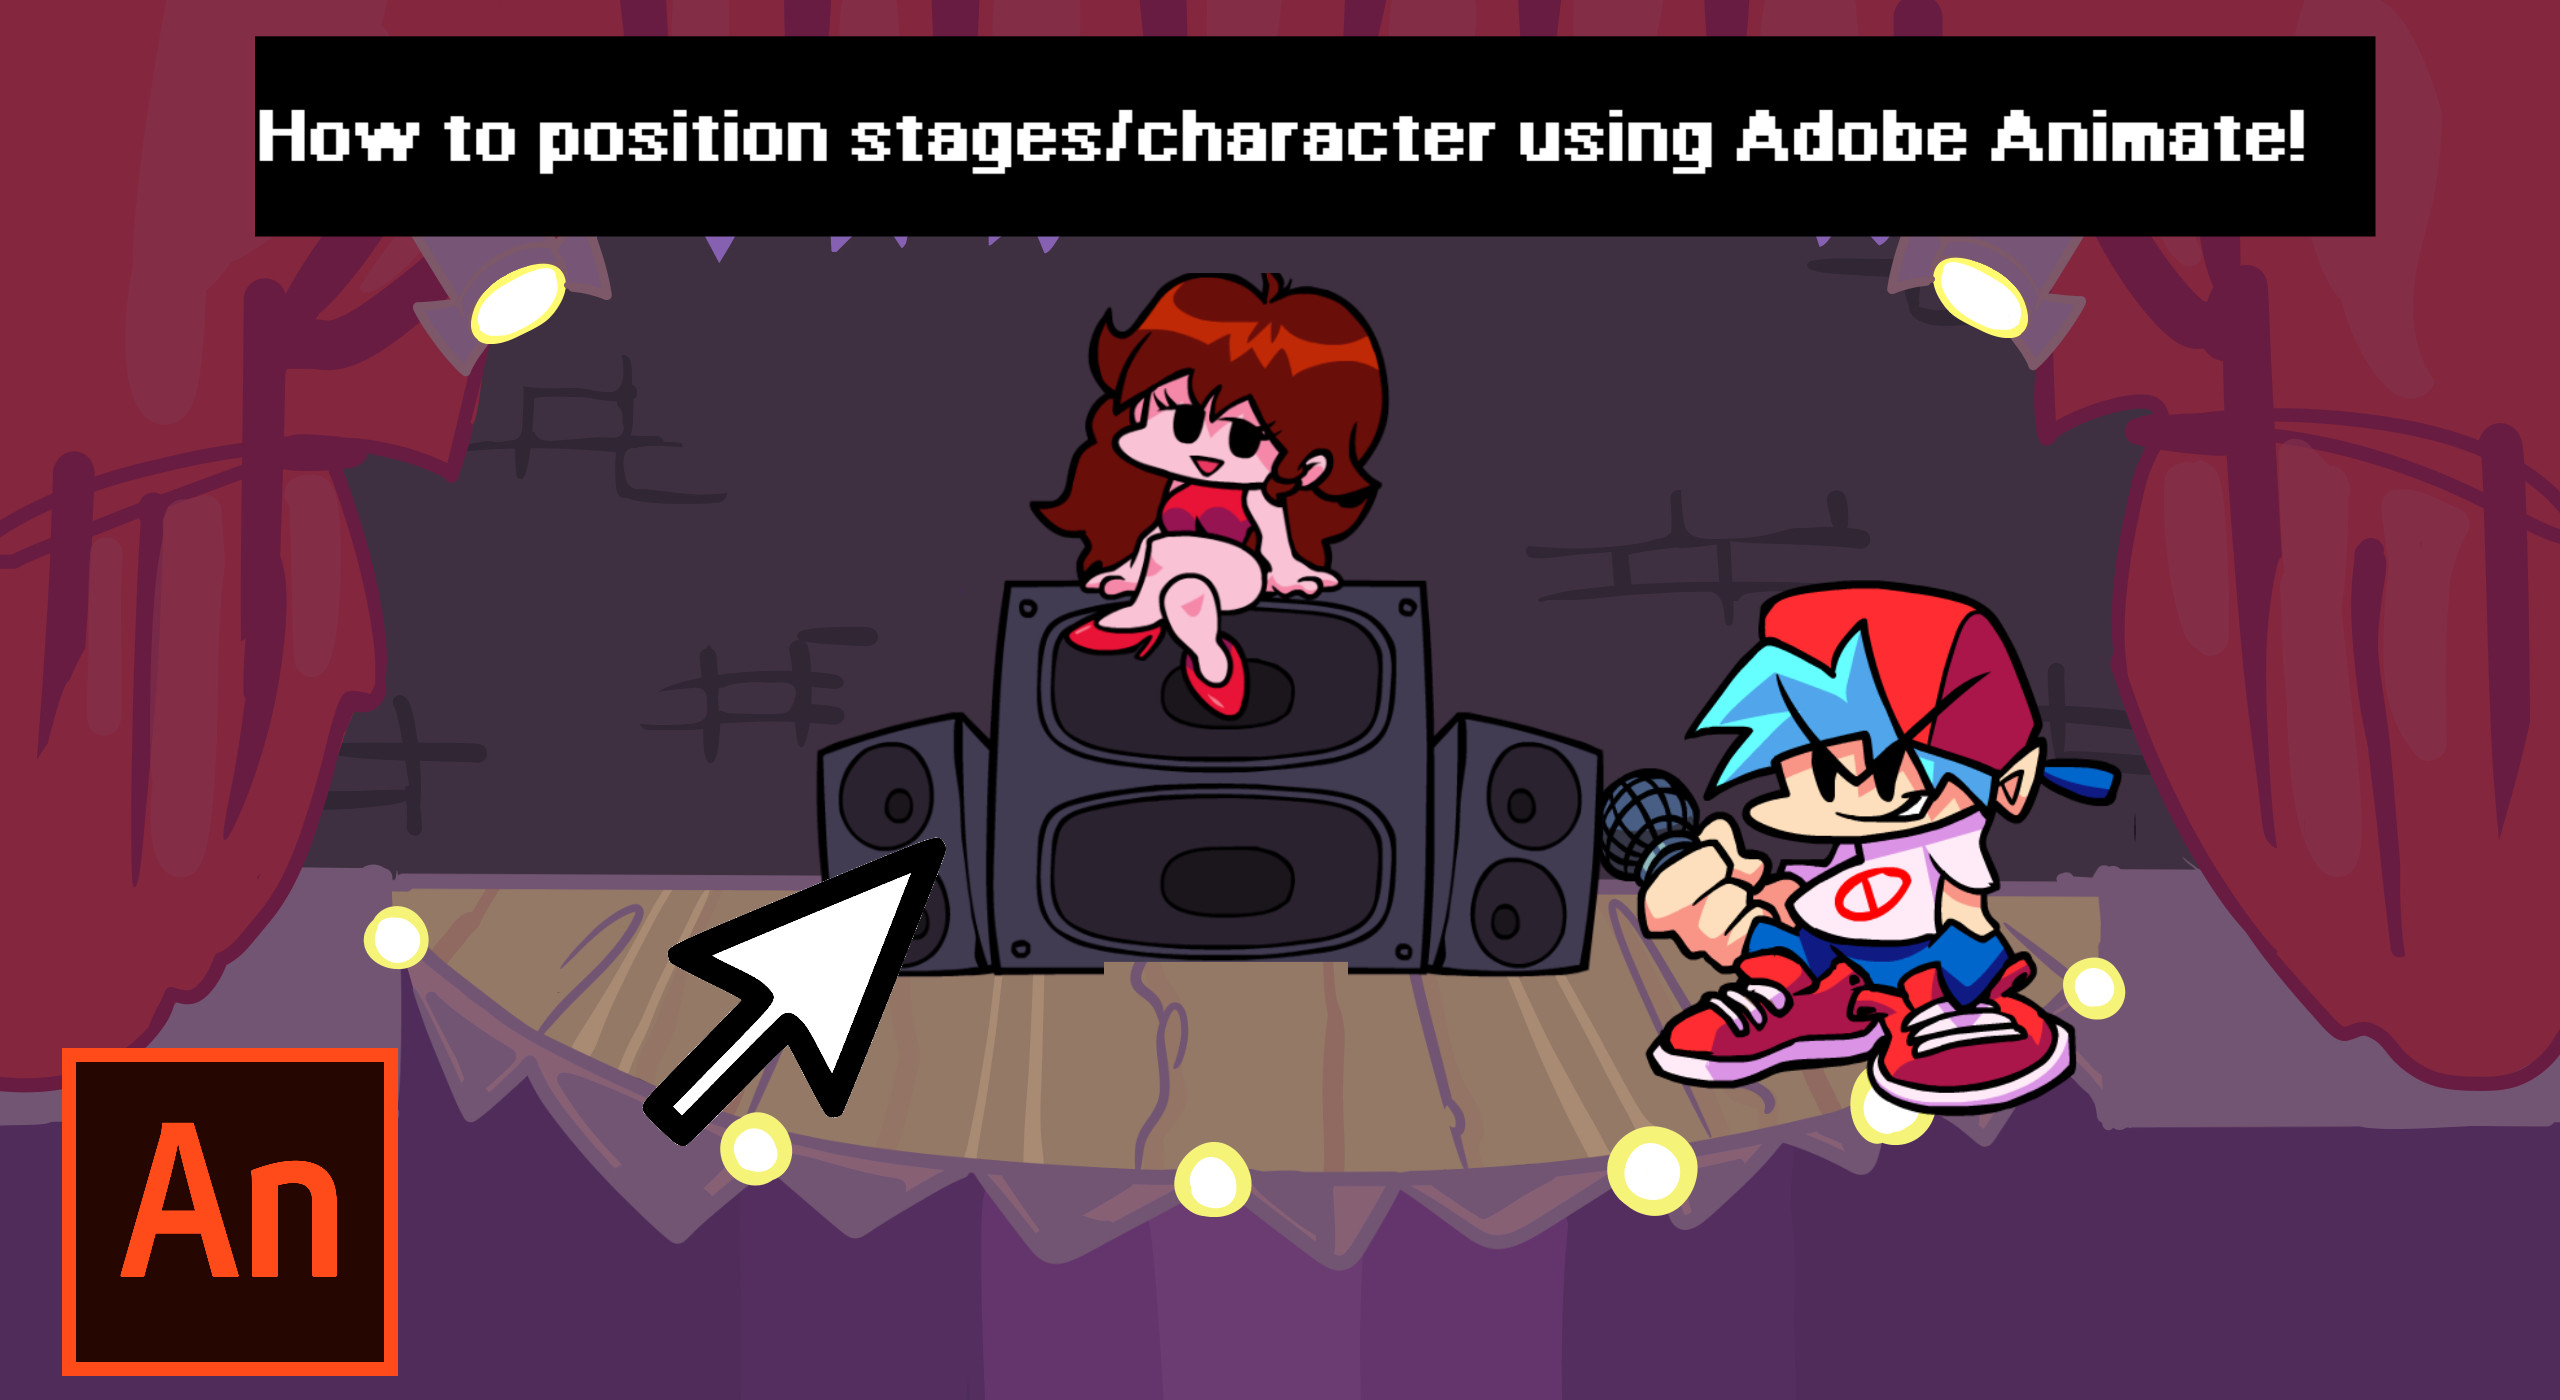 How to build stages using Adobe Animate [Friday Night Funkin'] [Tutorials]